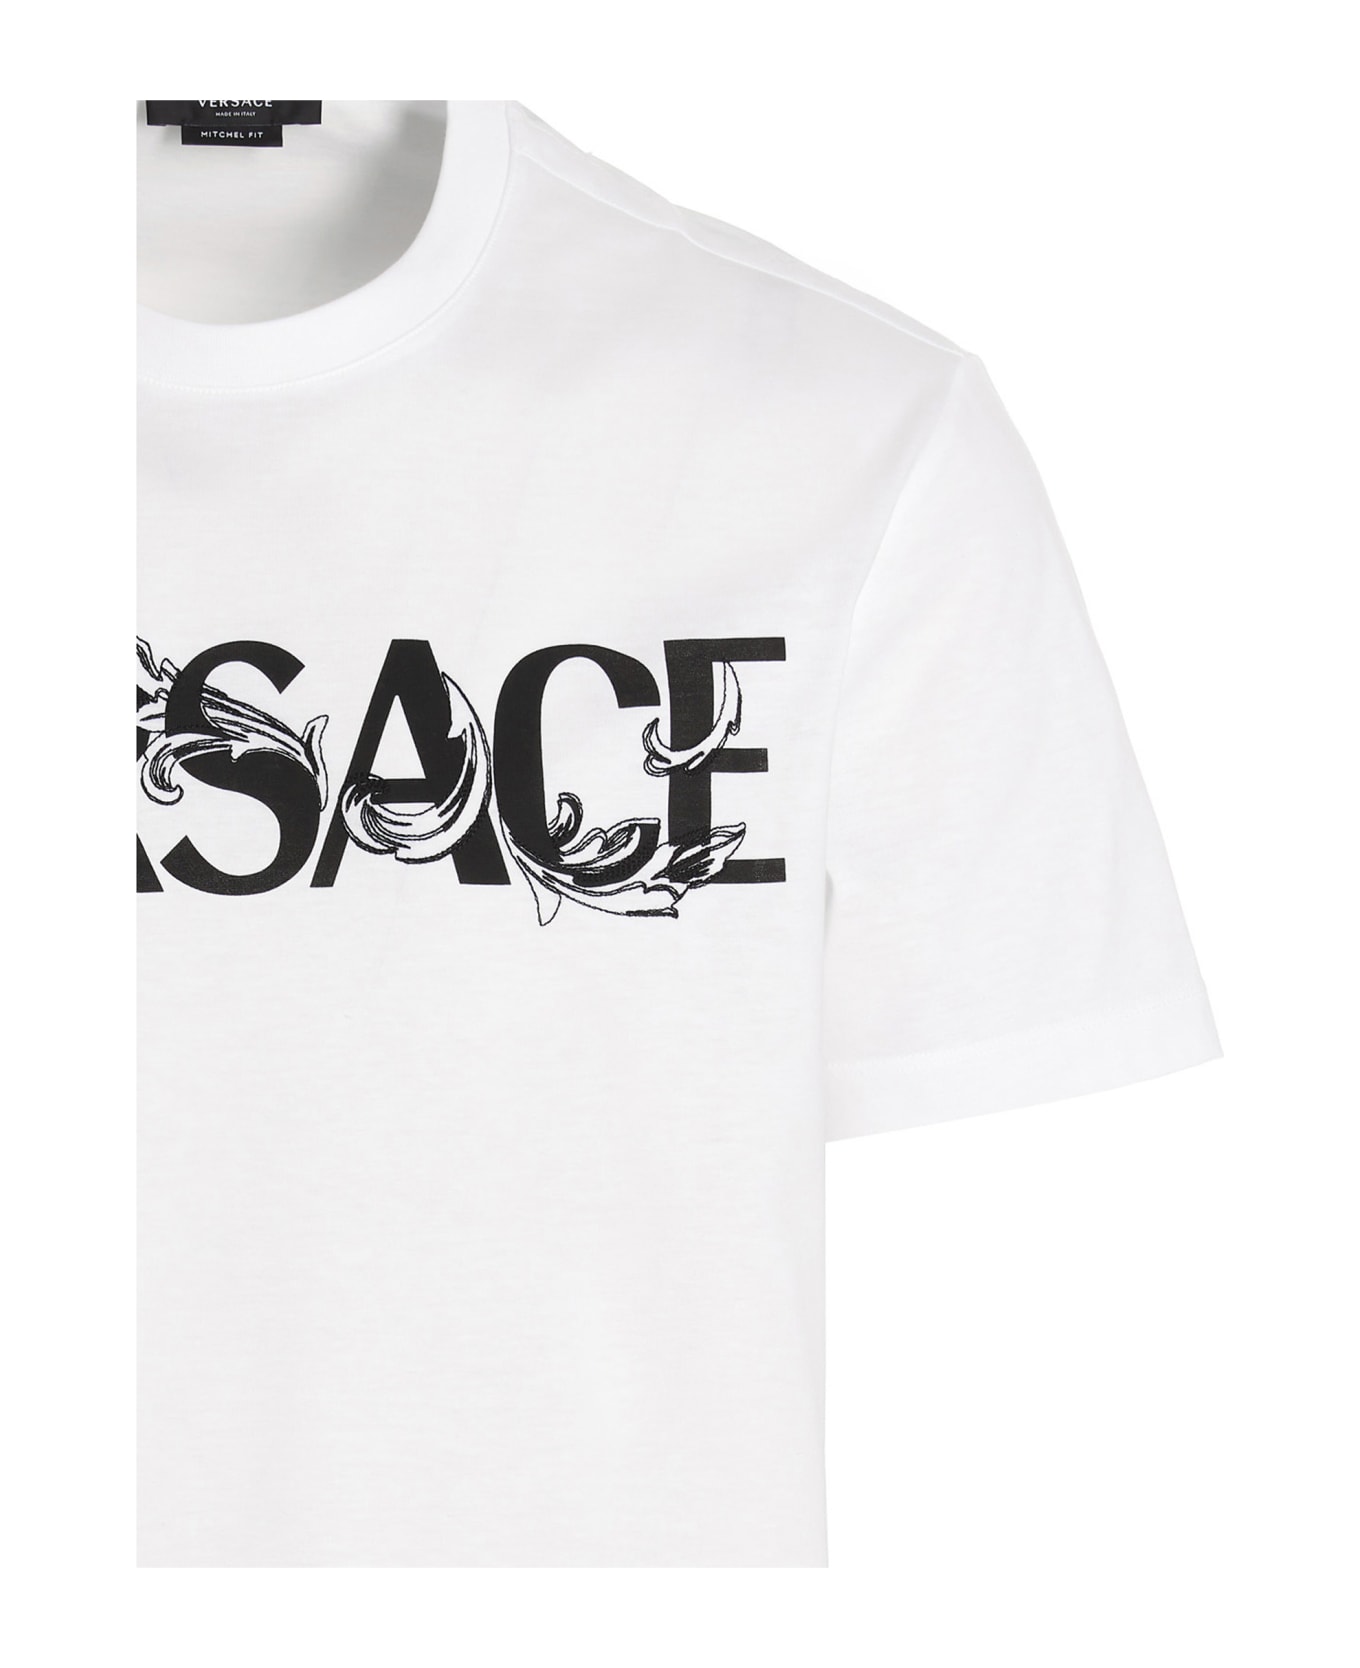 Versace Logo Embroidery T-shirt - White